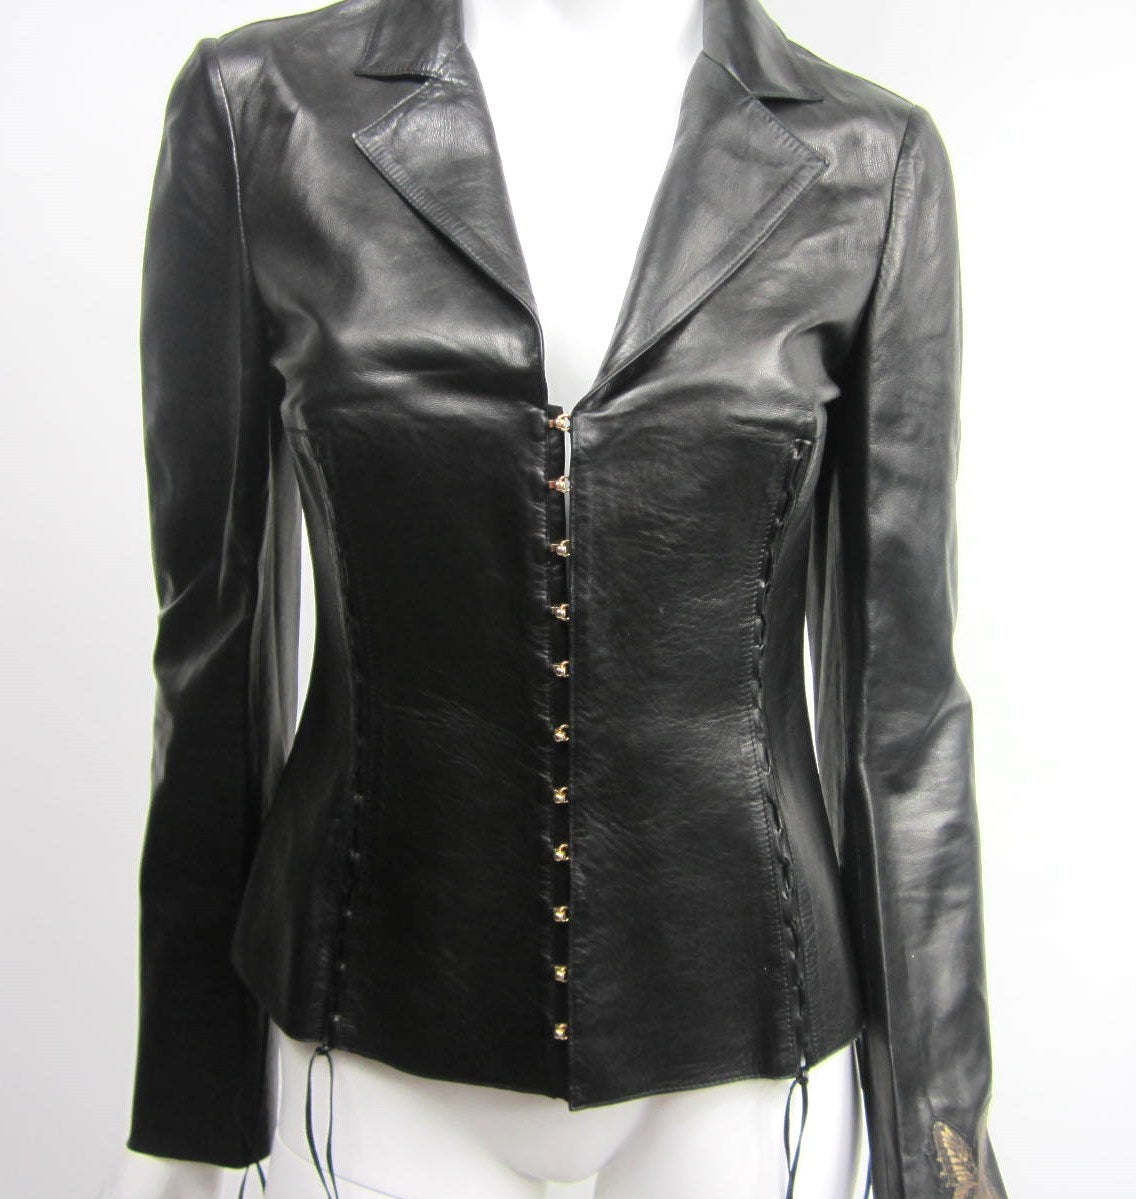 Laced up detailing on this butter soft leather jacket. Butterfly detail on left arm. Closures are Gold tone detailed hardware. Jacket is a XS-S. Great Rough edges on this one. Lacing detailing on this jacket are fabulous! Measures up to 34 in. Bust